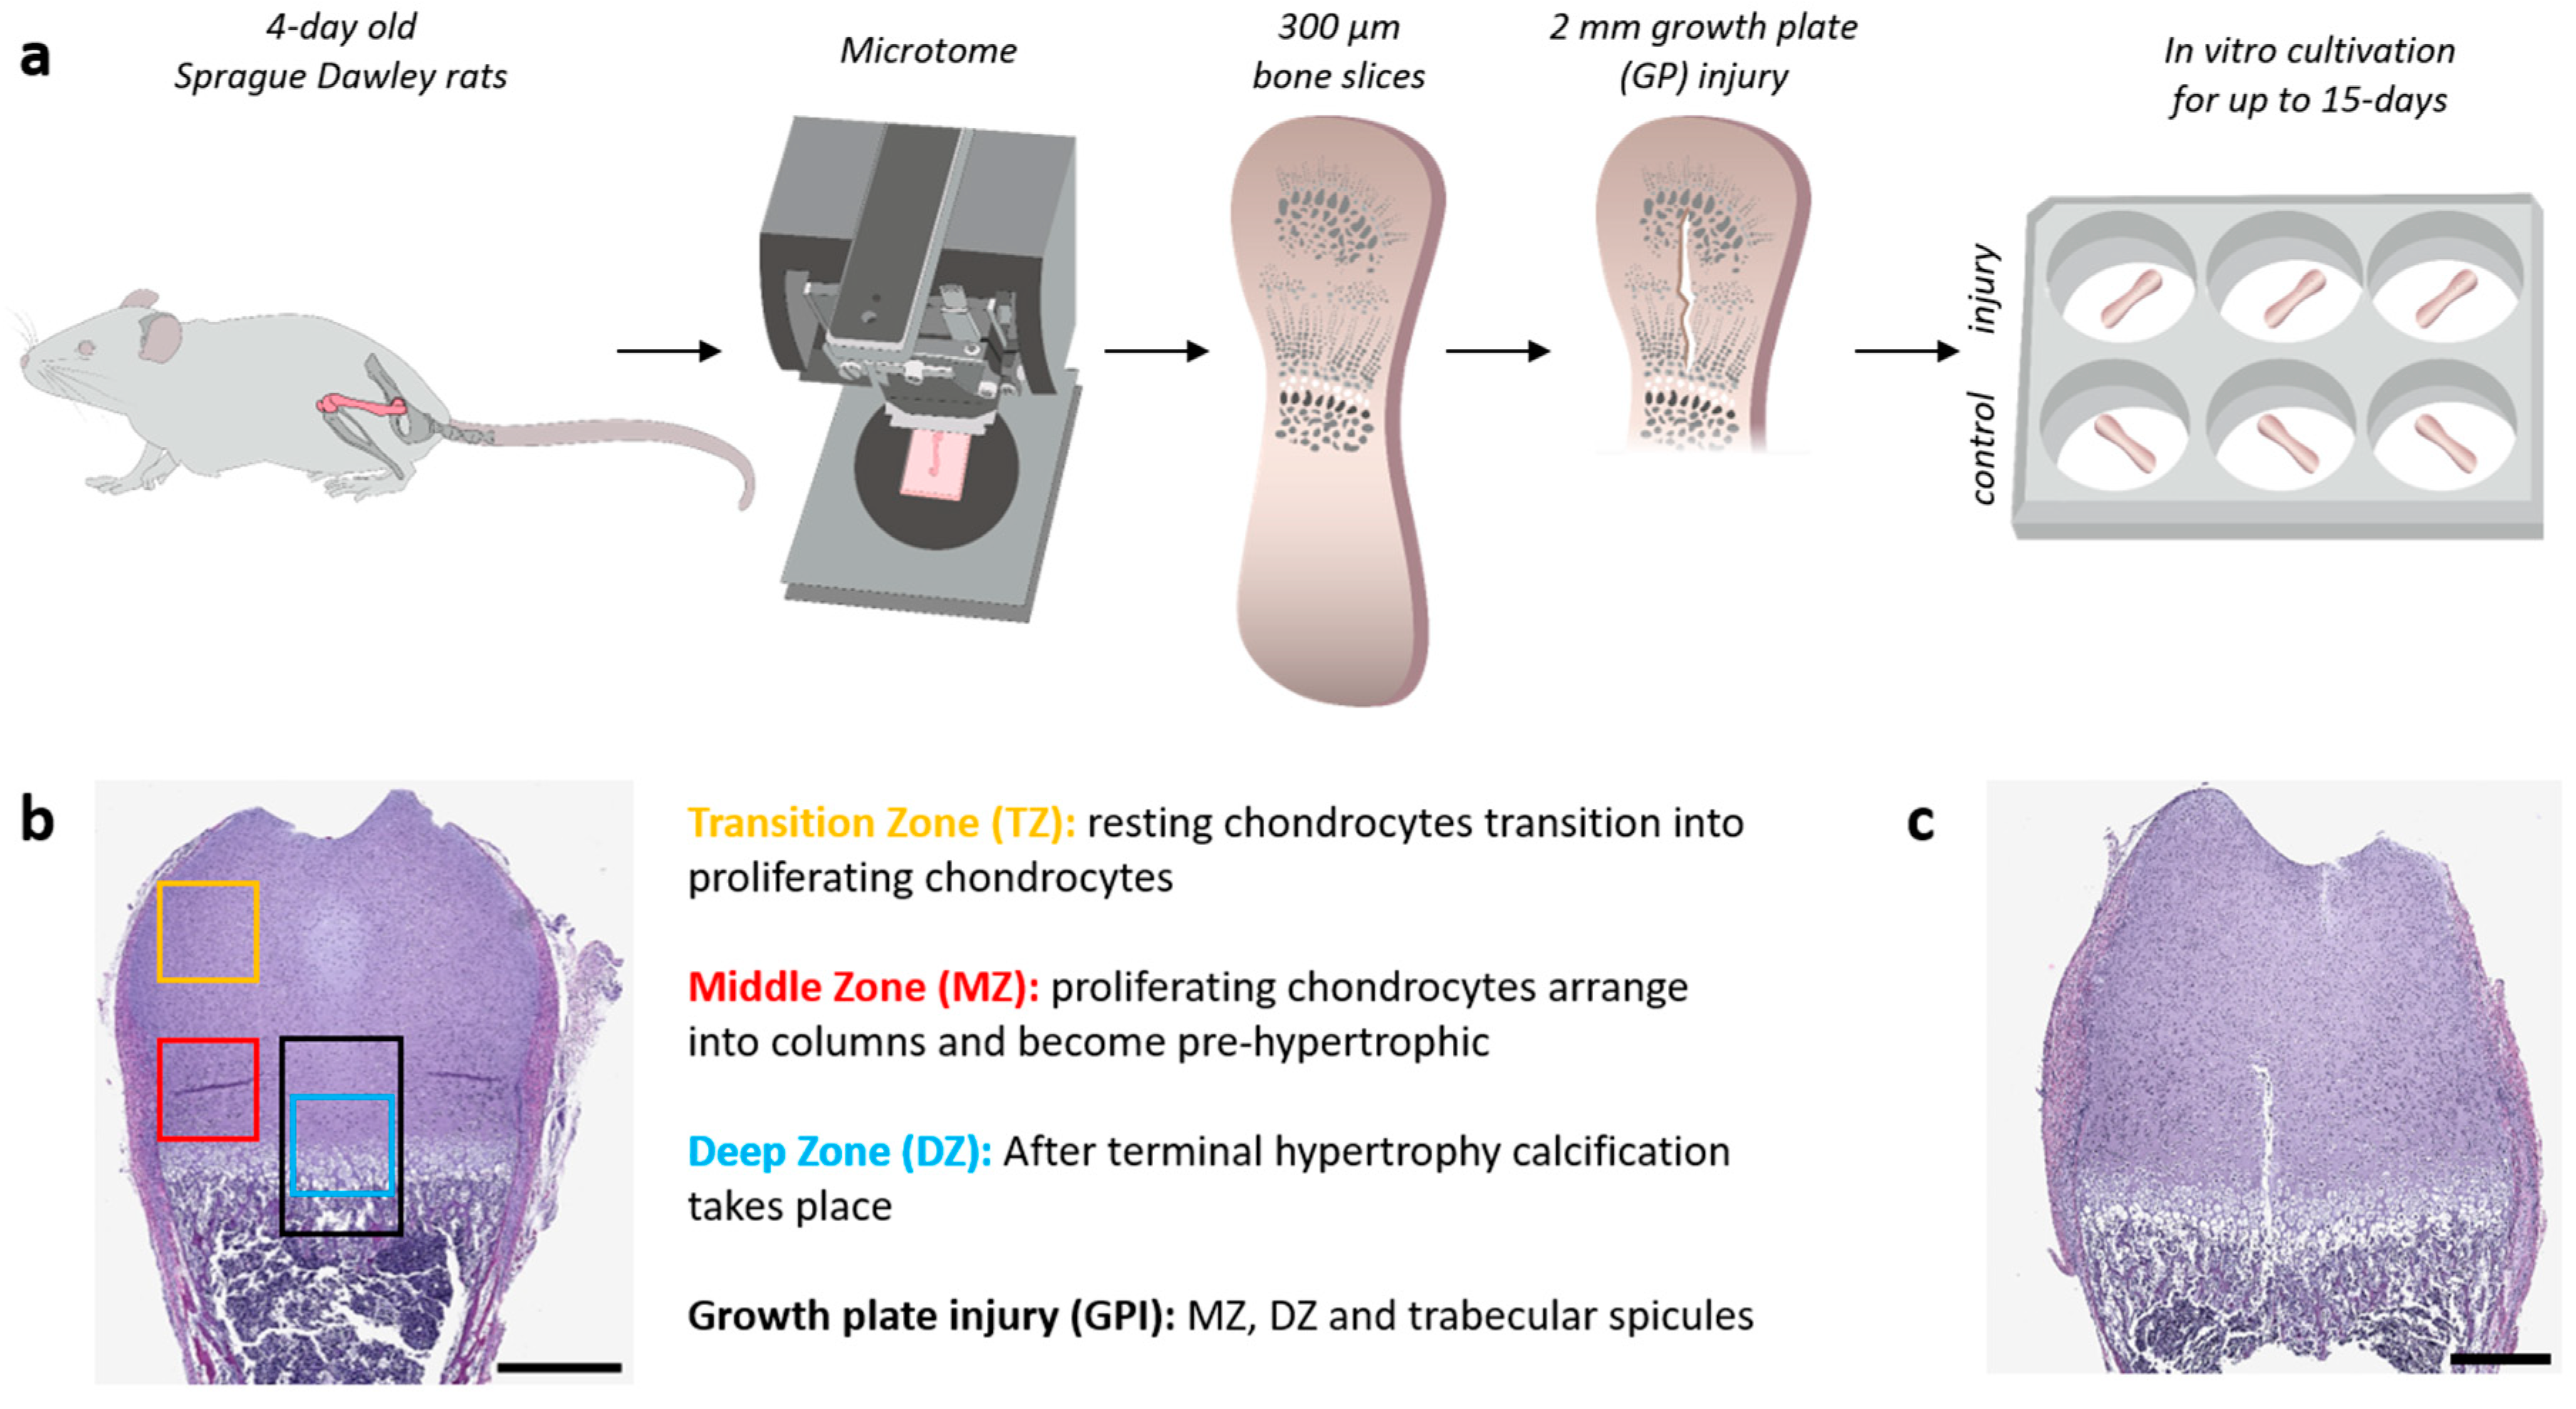 Cells | Free Full-Text | Disruption of Endochondral Ossification and  Extracellular Matrix Maturation in an Ex Vivo Rat Femur Organotypic Slice  Model Due to Growth Plate Injury